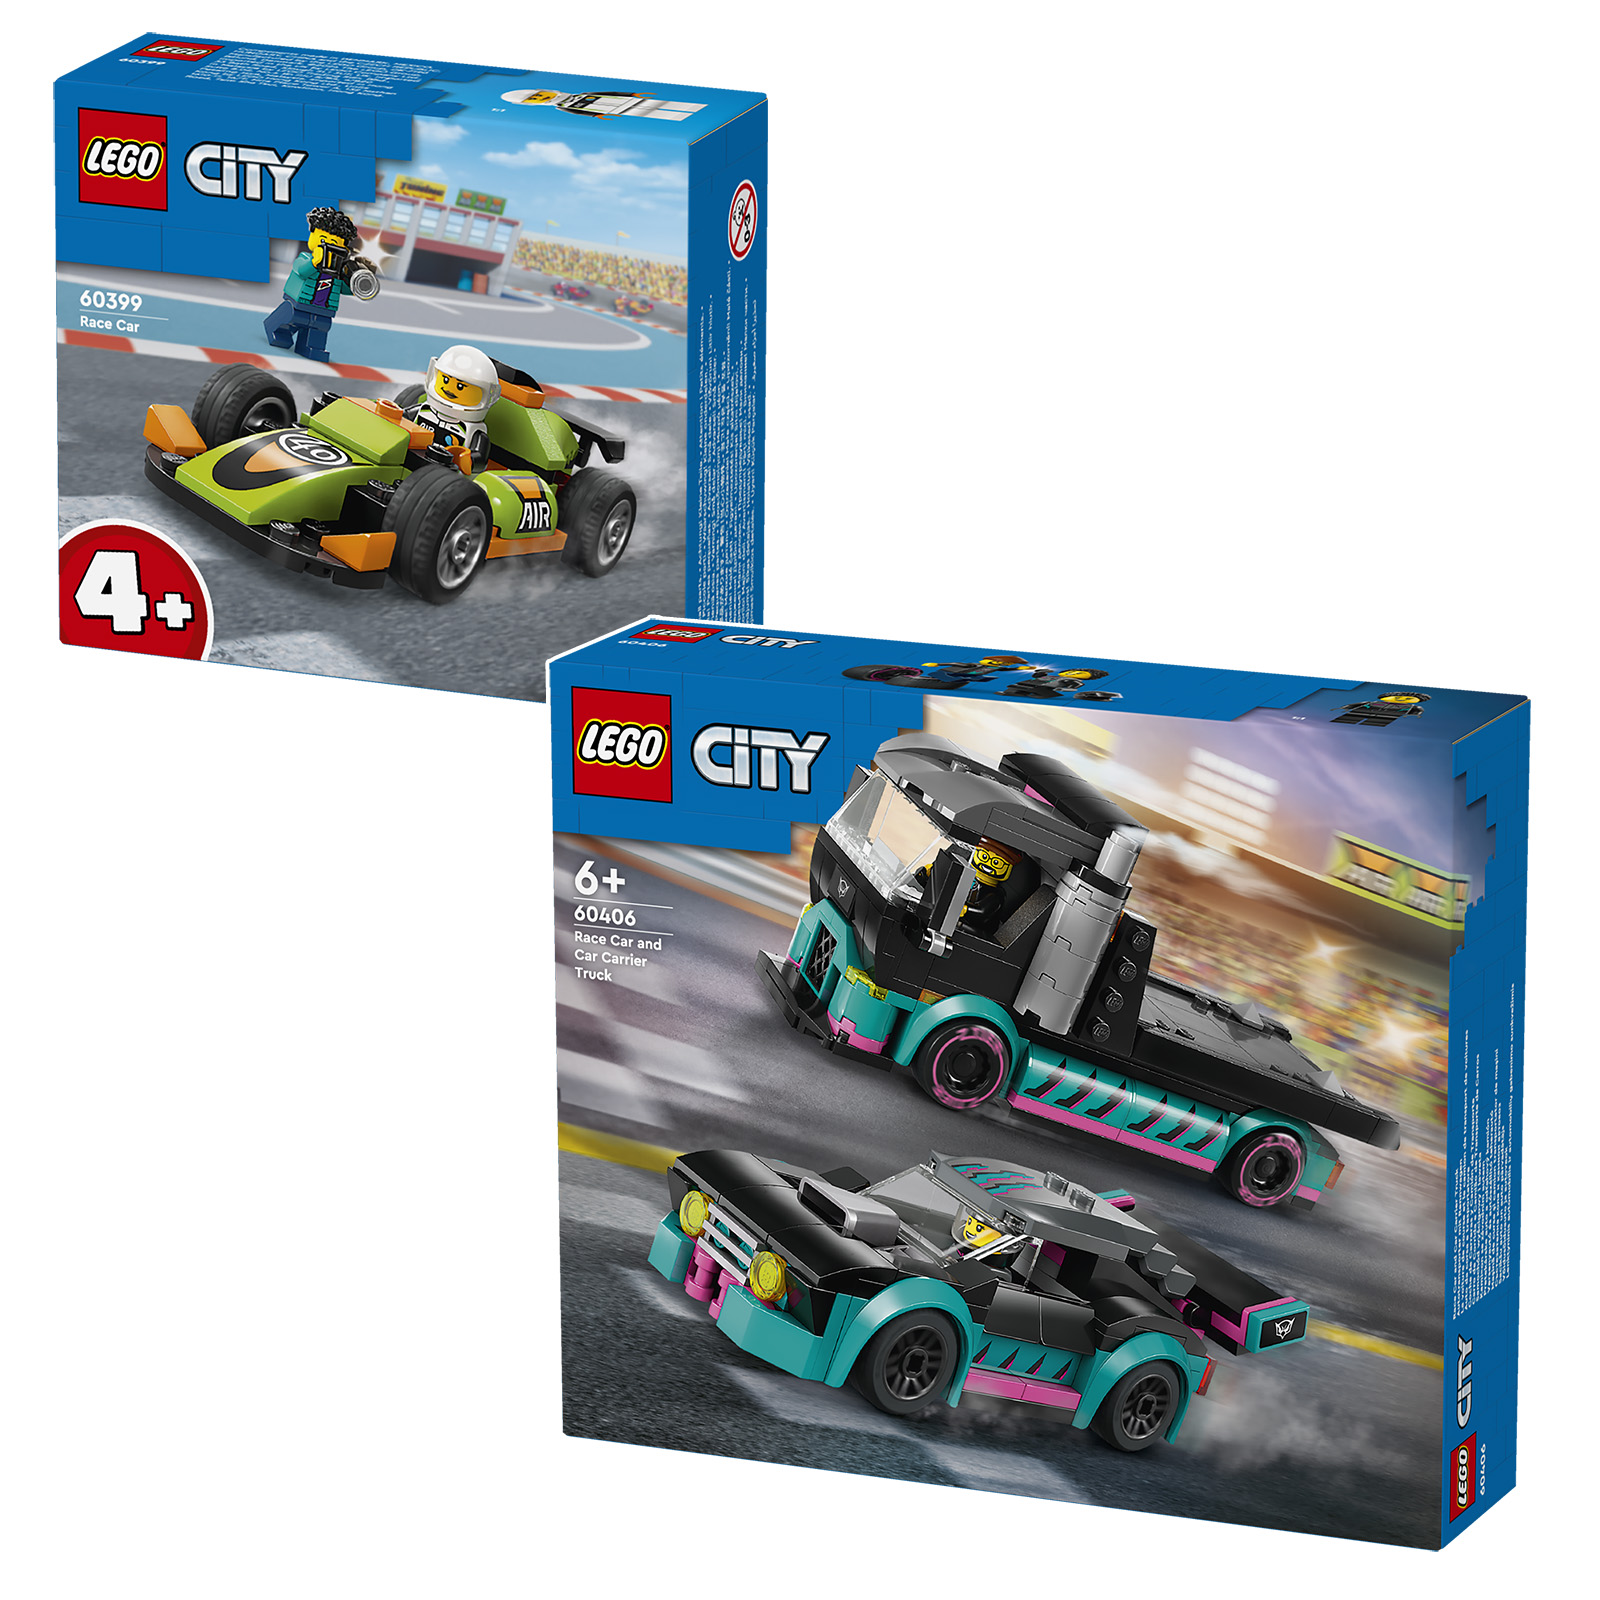 LEGO City 60406 Race Car and Car Carrier Truck Leaked Online For